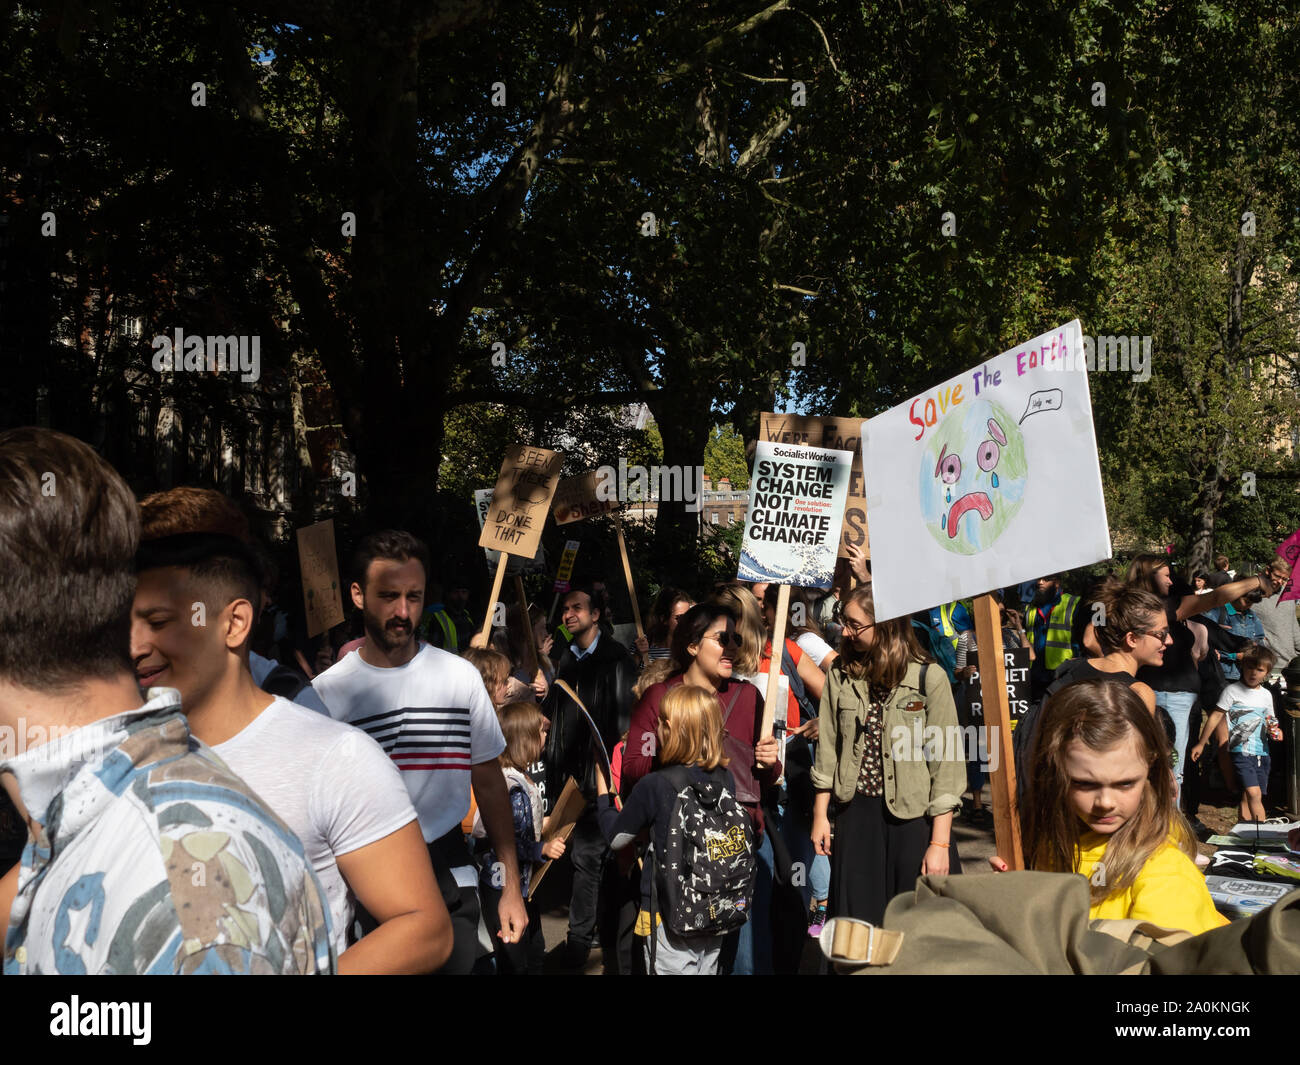 LONDON, UK - SEPTEMBER 20 2019: Crowd of people at the Global Climate Strike in London, holding placards Stock Photo